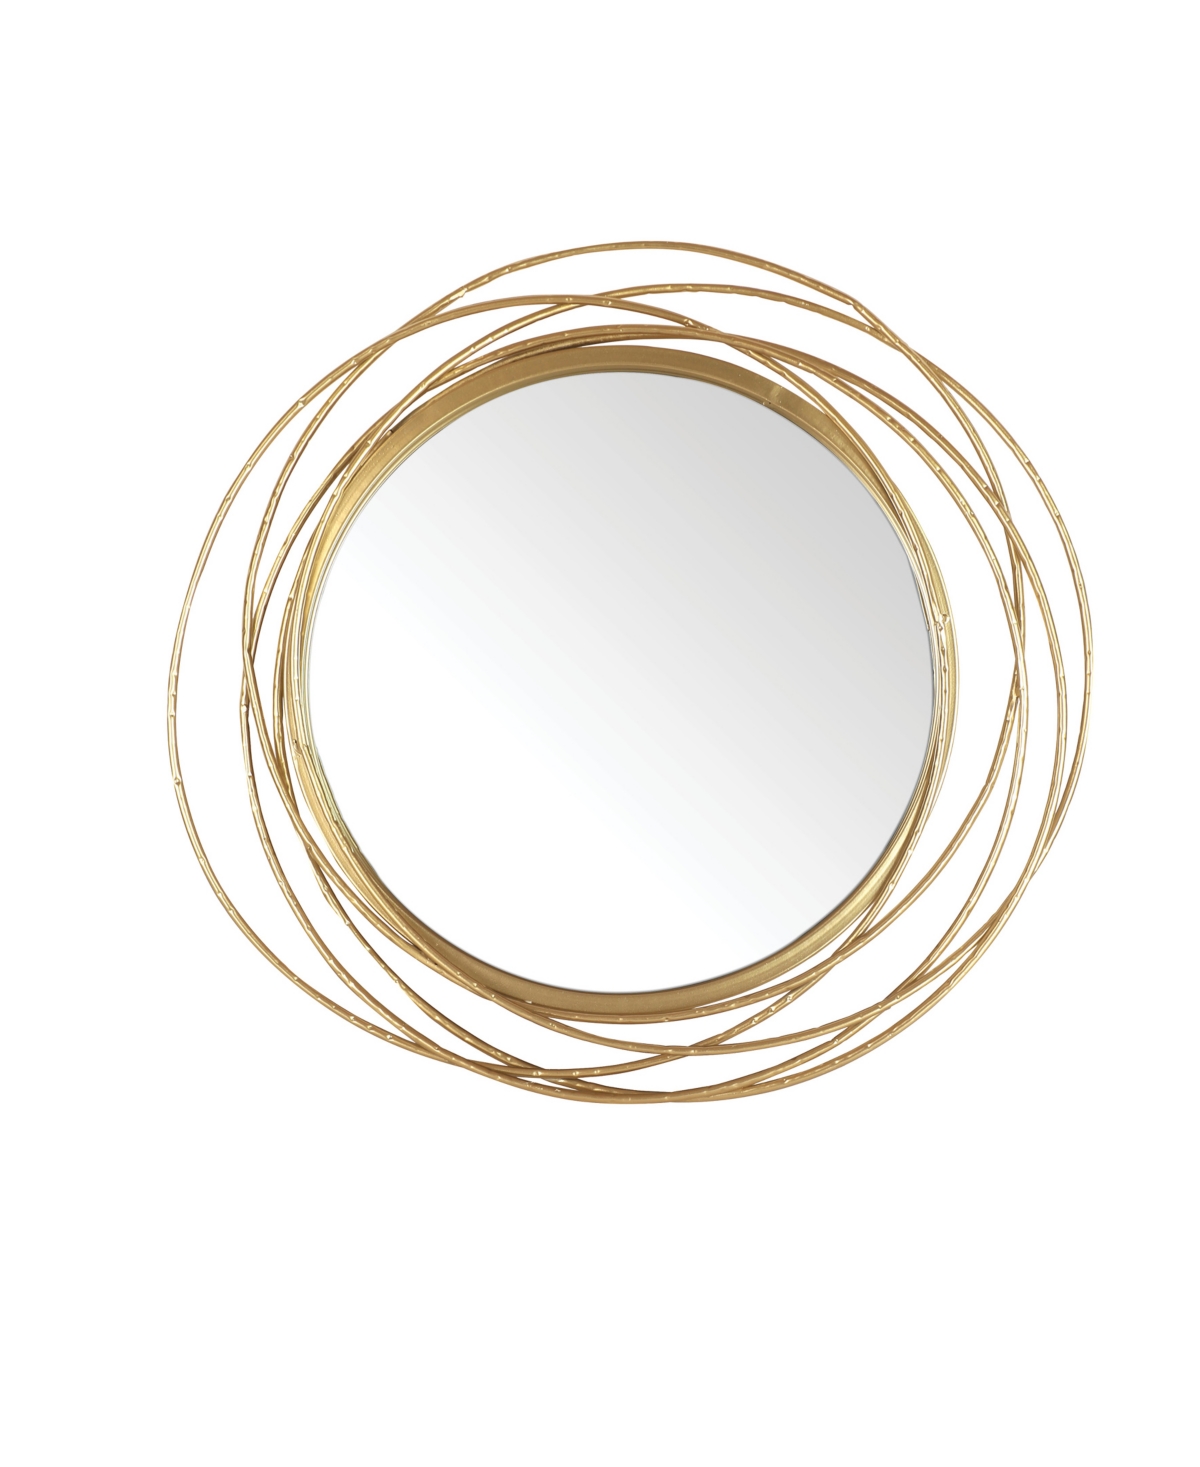 Decorative Round Rings Mirror, 20" D - Gold